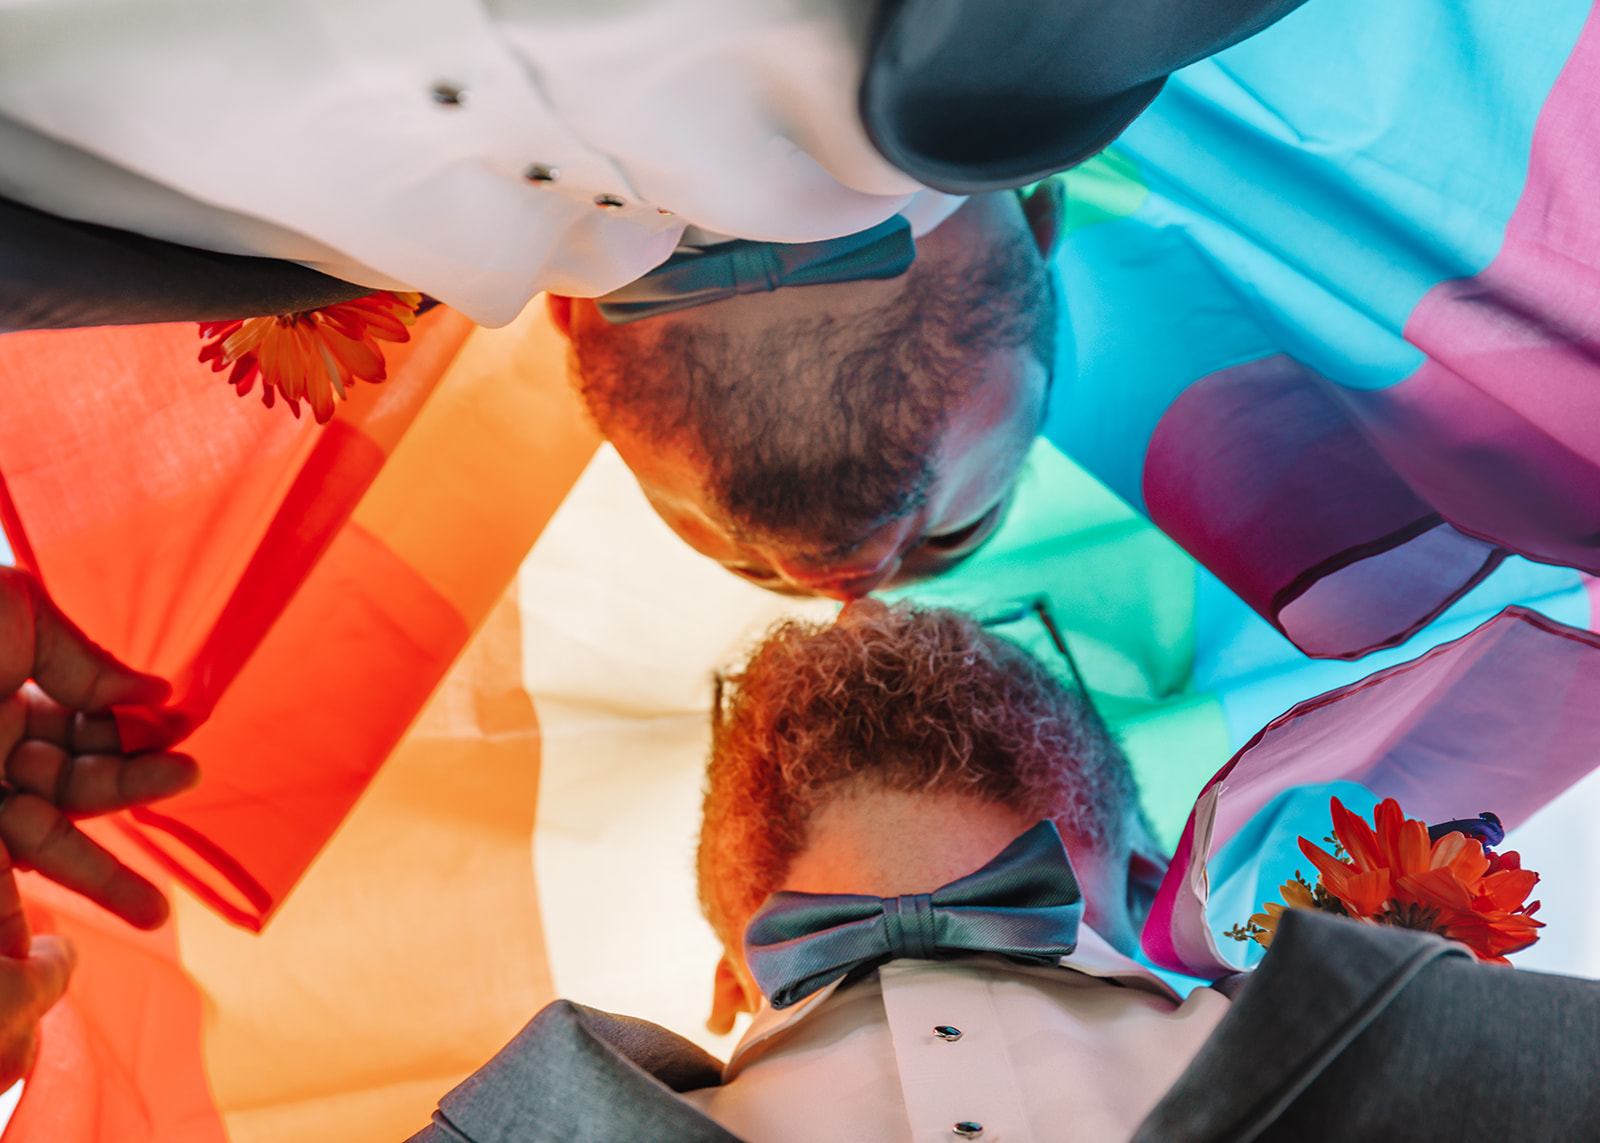 Two grooms celebrating their love under a Pride Flag. Love is love.